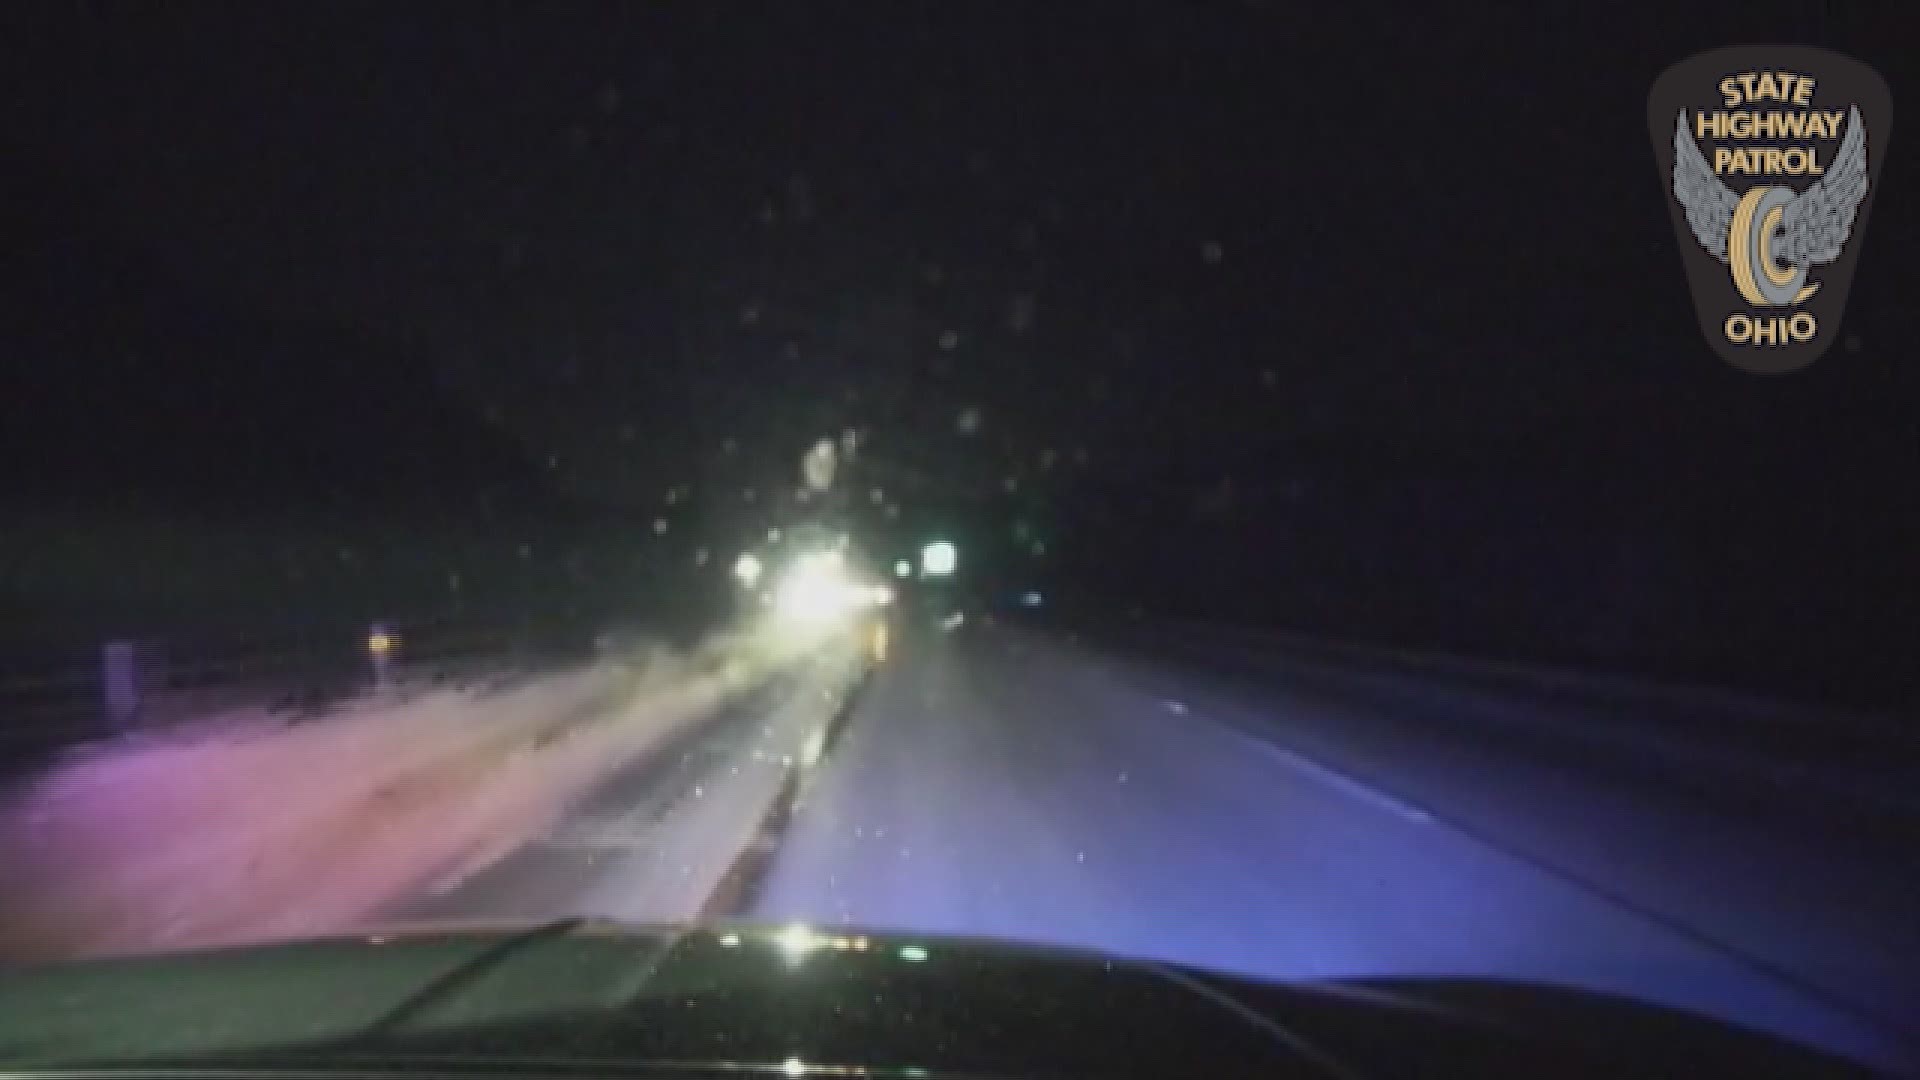 Video courtesy of the Ohio State Highway Patrol shows the aftermath when a 12-year-old drove from Youngstown and crashed on I-76 in Portage County.